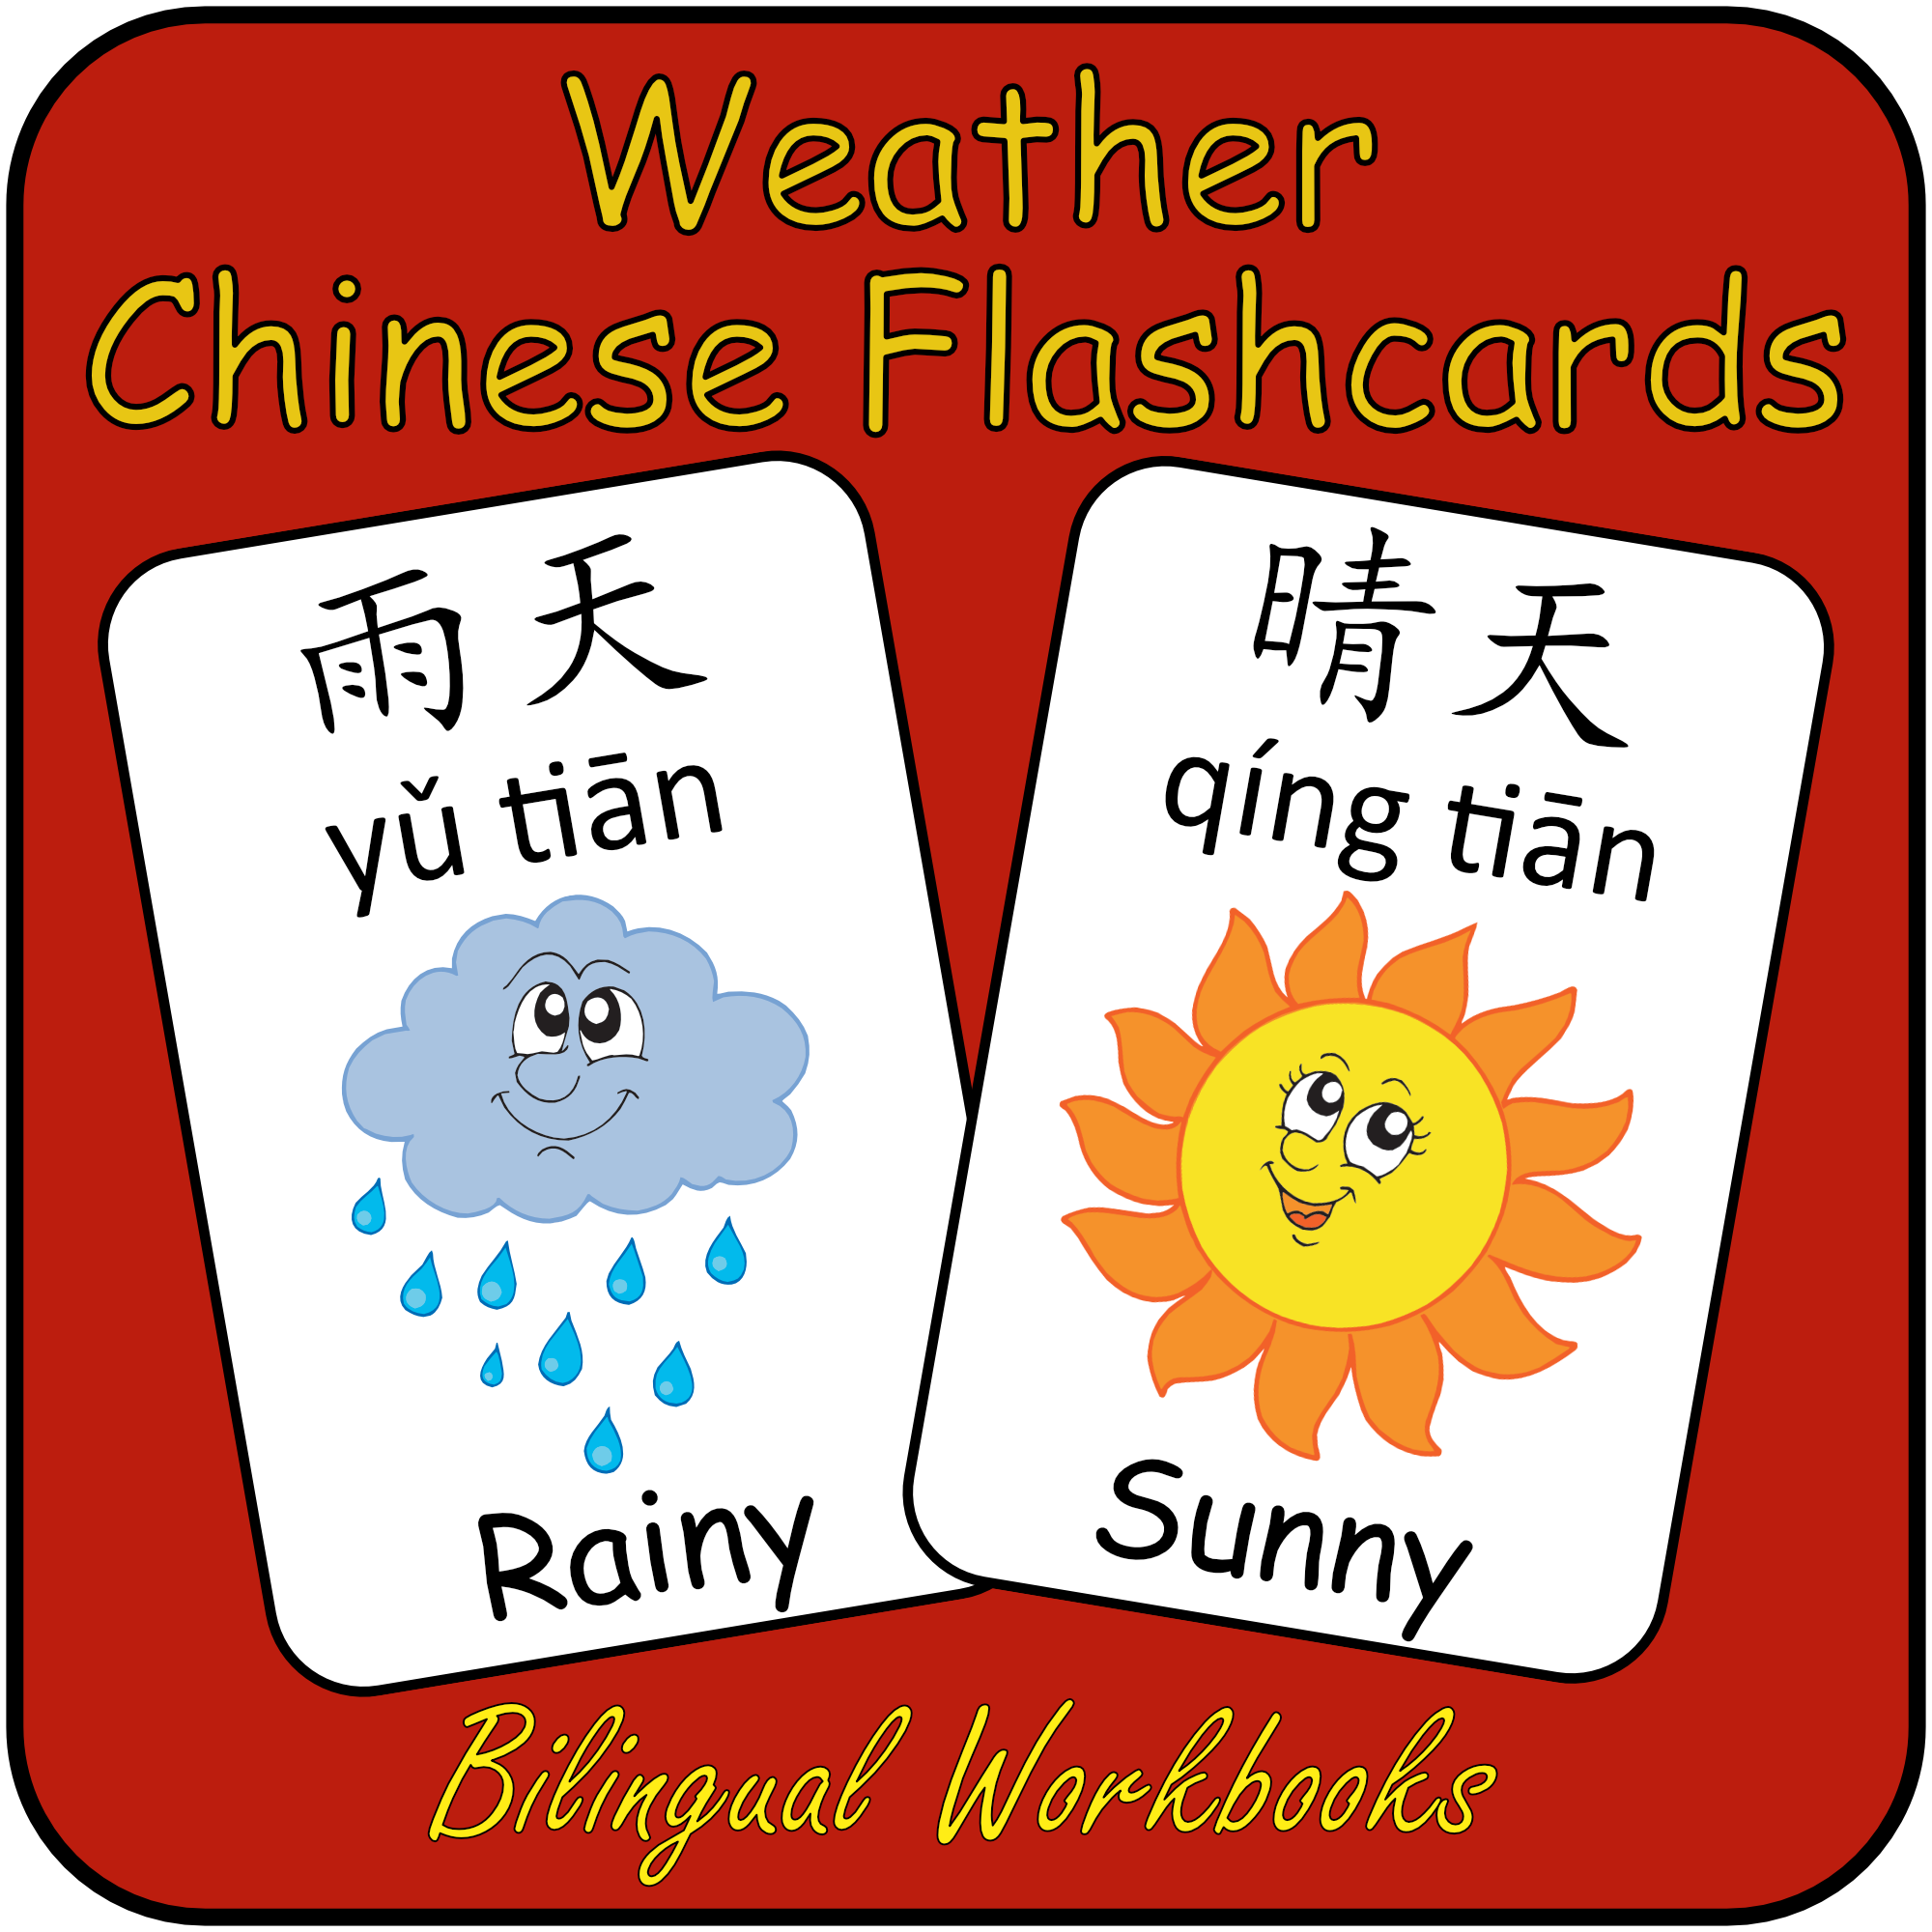 Mandarin Chinese First Words Flashcards - Weather flash cards with English name, Simplified Chinese Character and Pinyin